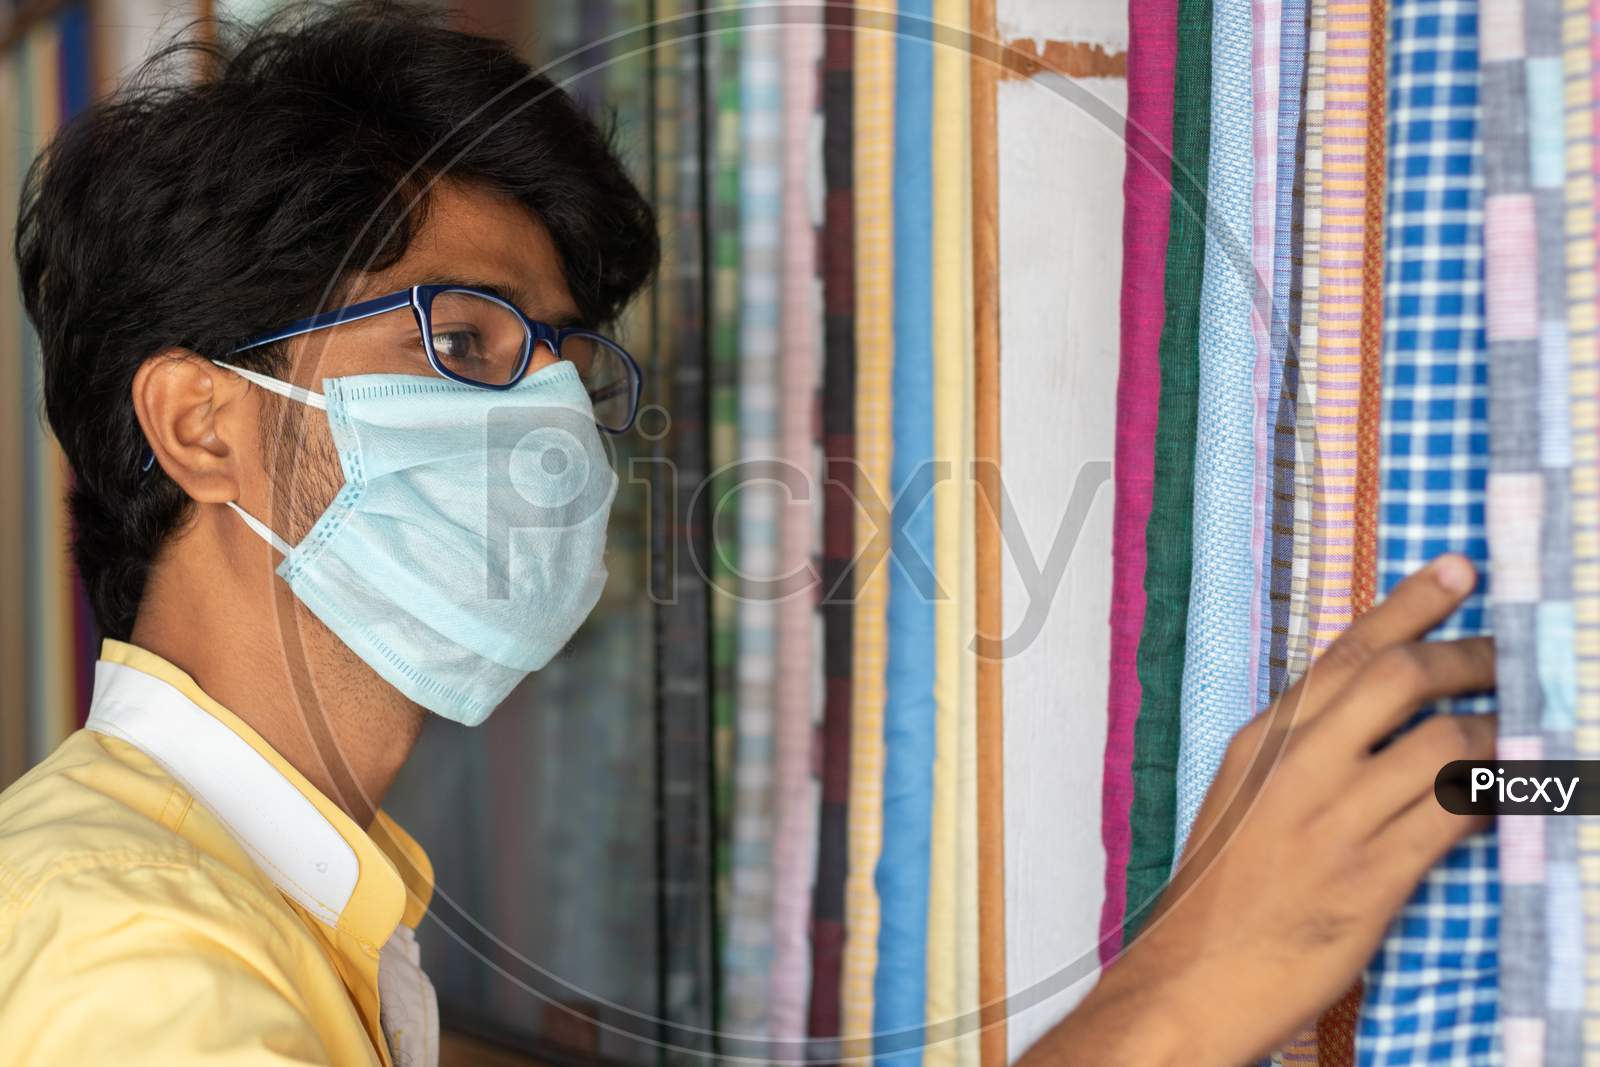 Young Man With Medical Mask Selecting Or Buying Cloth At Store During Coronavirus Or Covid-19 Pandemic - Concept Of New Normal, Business Reopen And Support Local Community After Lock Down.